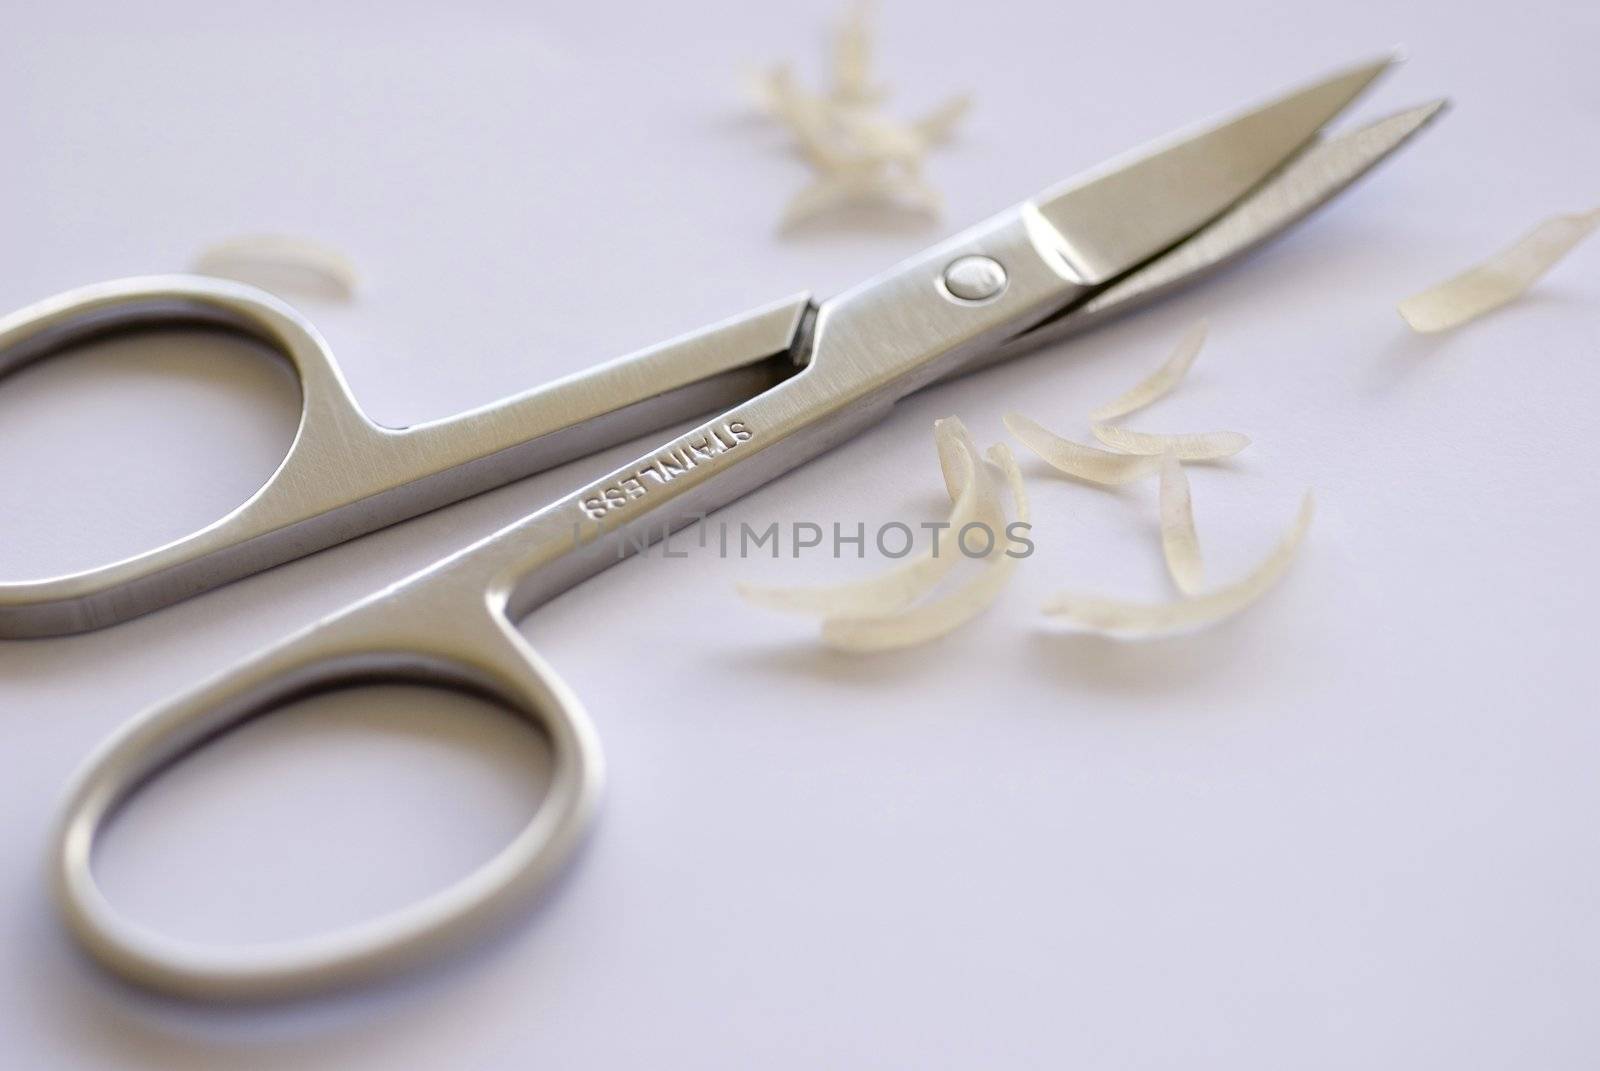 a pair of curved nail scissors and some nail clippings